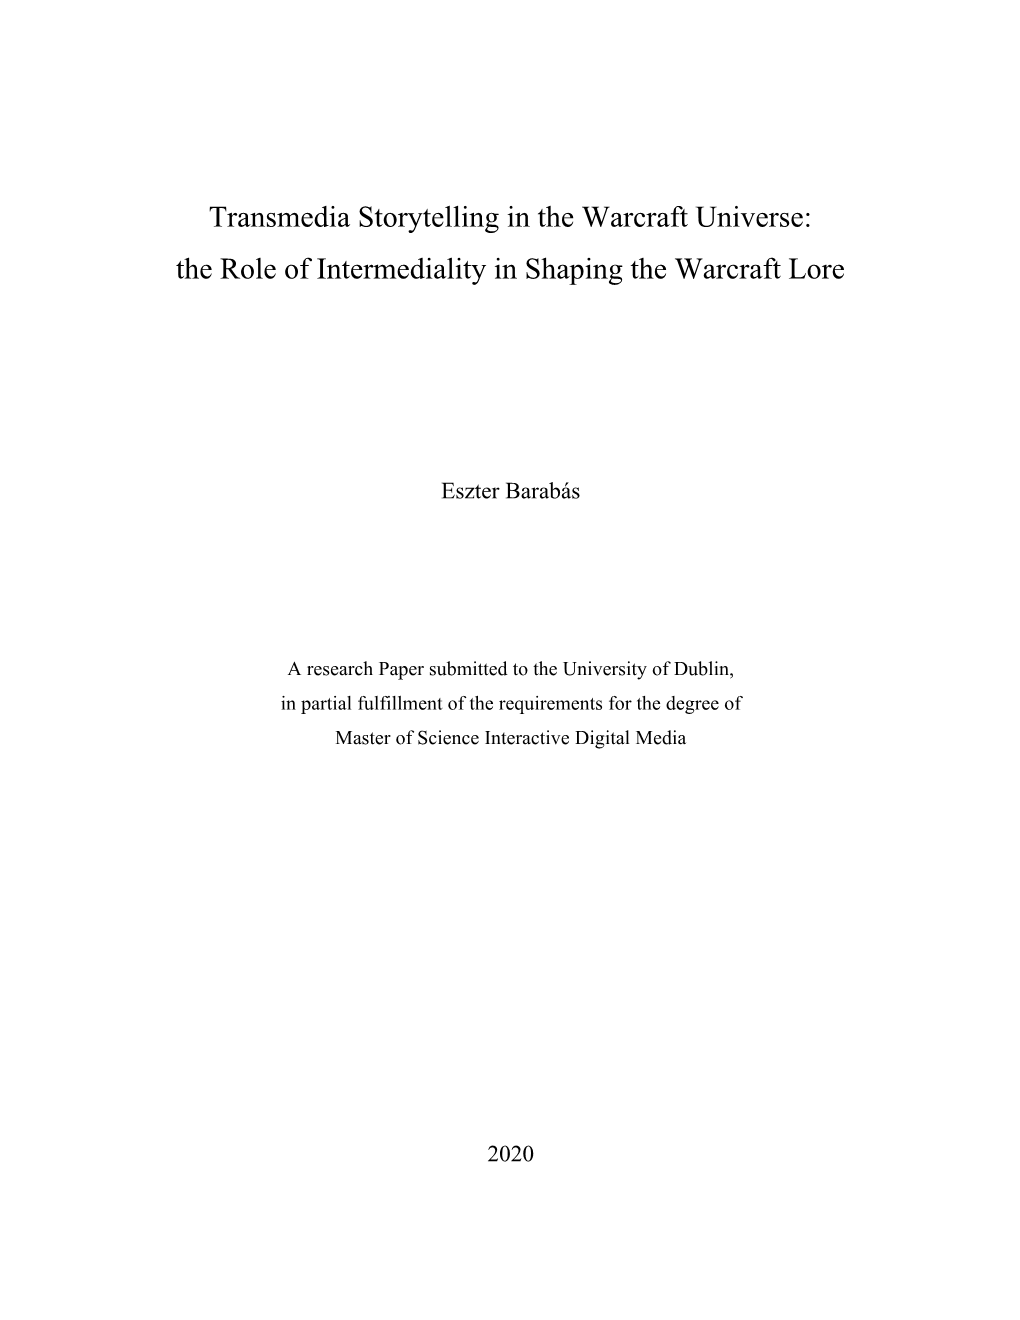 Transmedia Storytelling in the Warcraft Universe: the Role of Intermediality in Shaping the Warcraft Lore